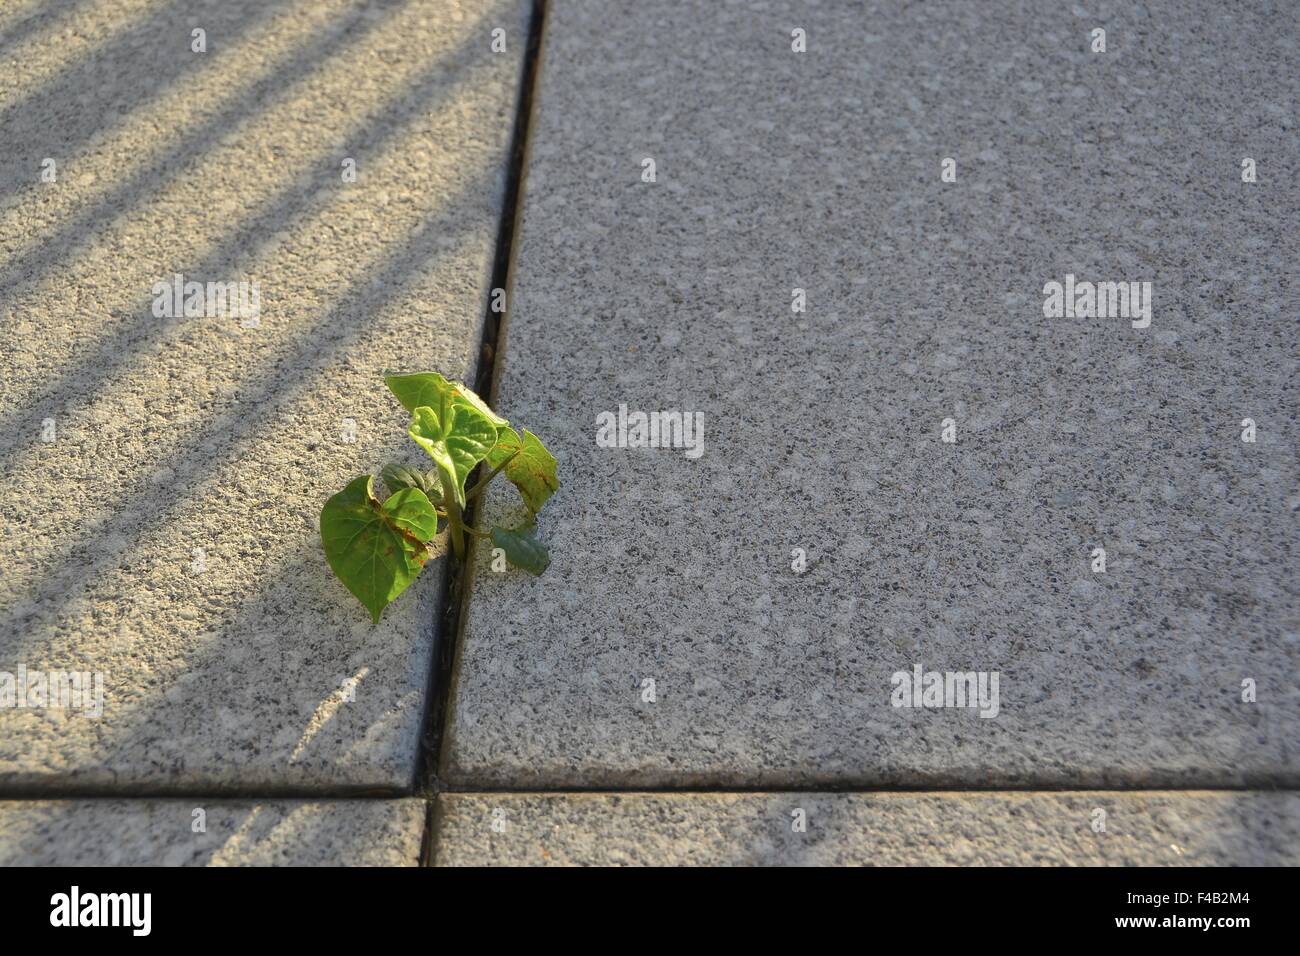 Struggle for survival of a plant Stock Photo